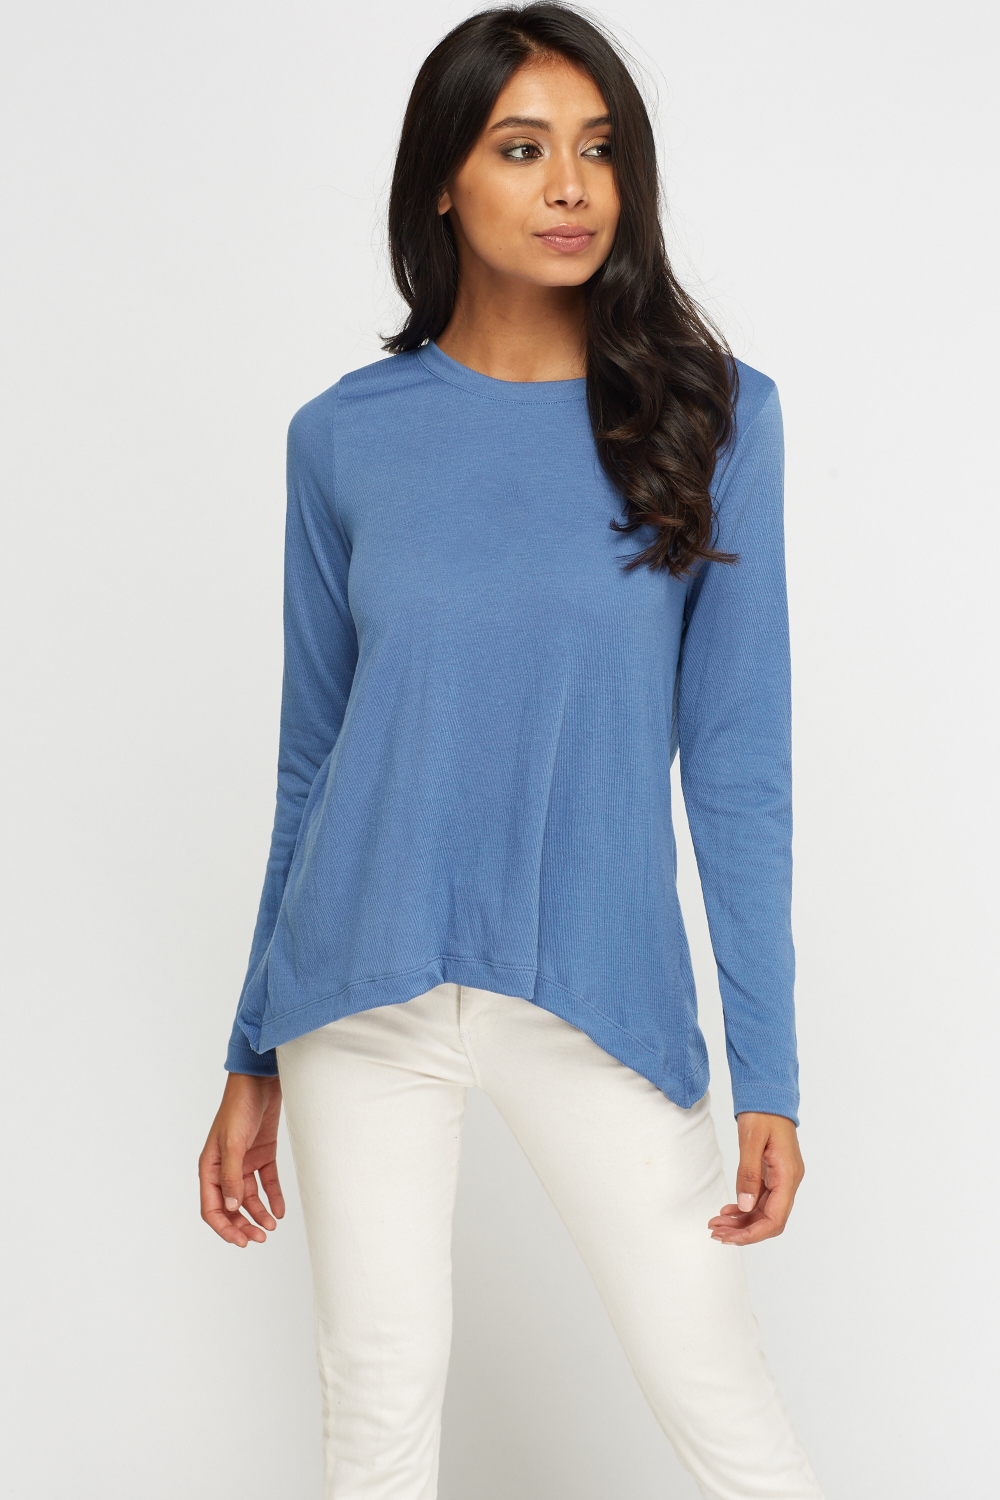 Ribbed Long Sleeve Knit Top - Just $7